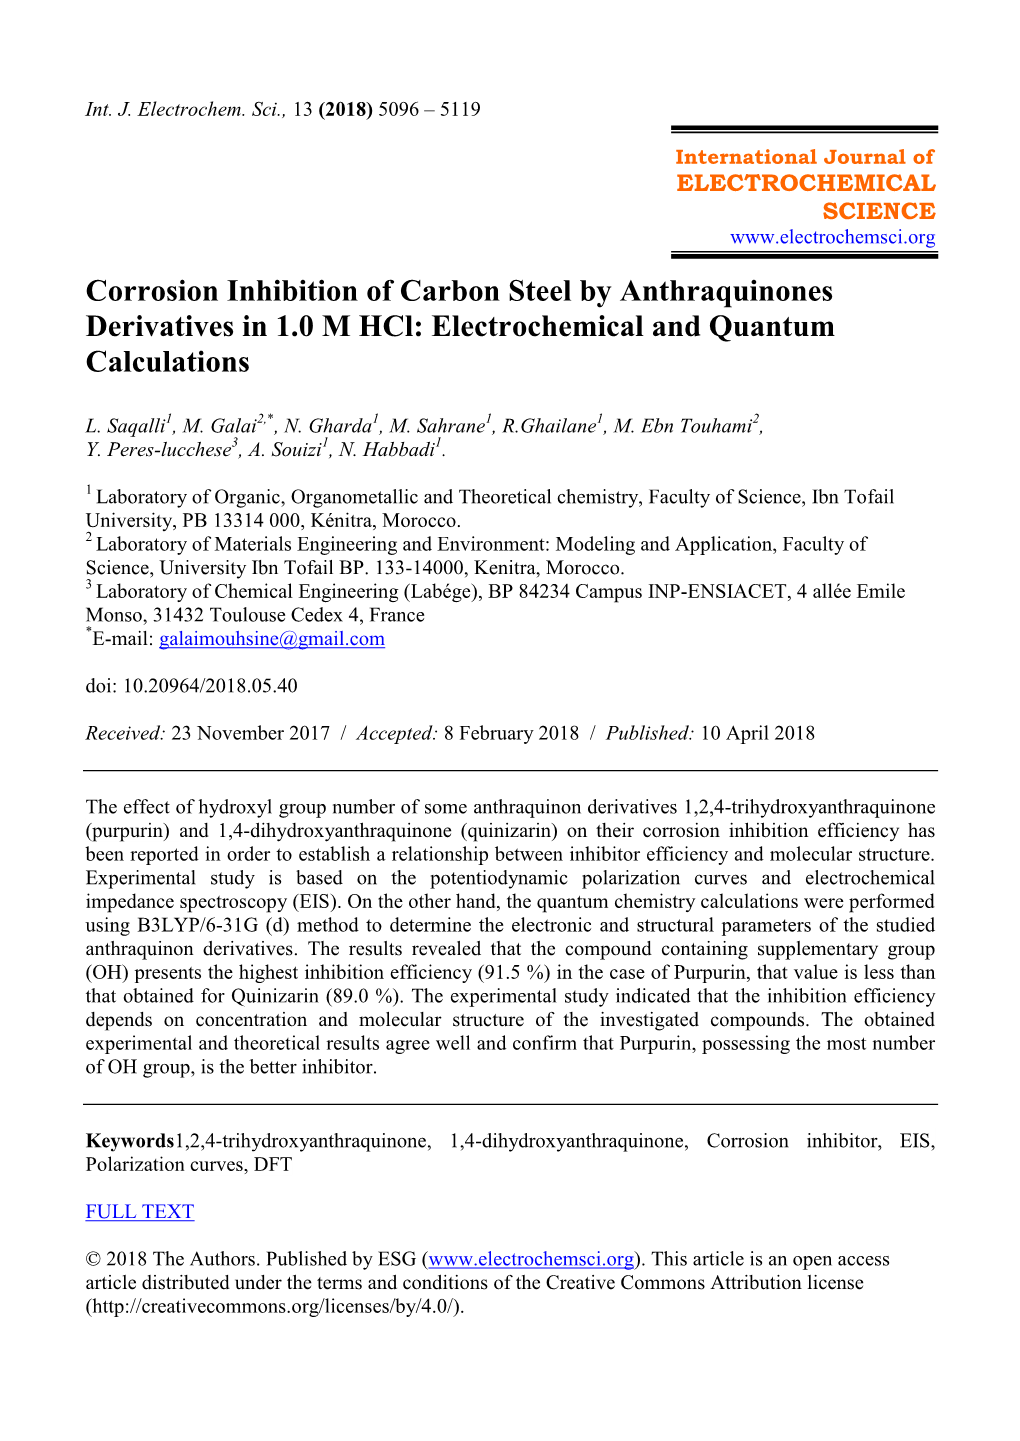 Corrosion Inhibition of Carbon Steel by Anthraquinones Derivatives in 1.0 M Hcl: Electrochemical and Quantum Calculations